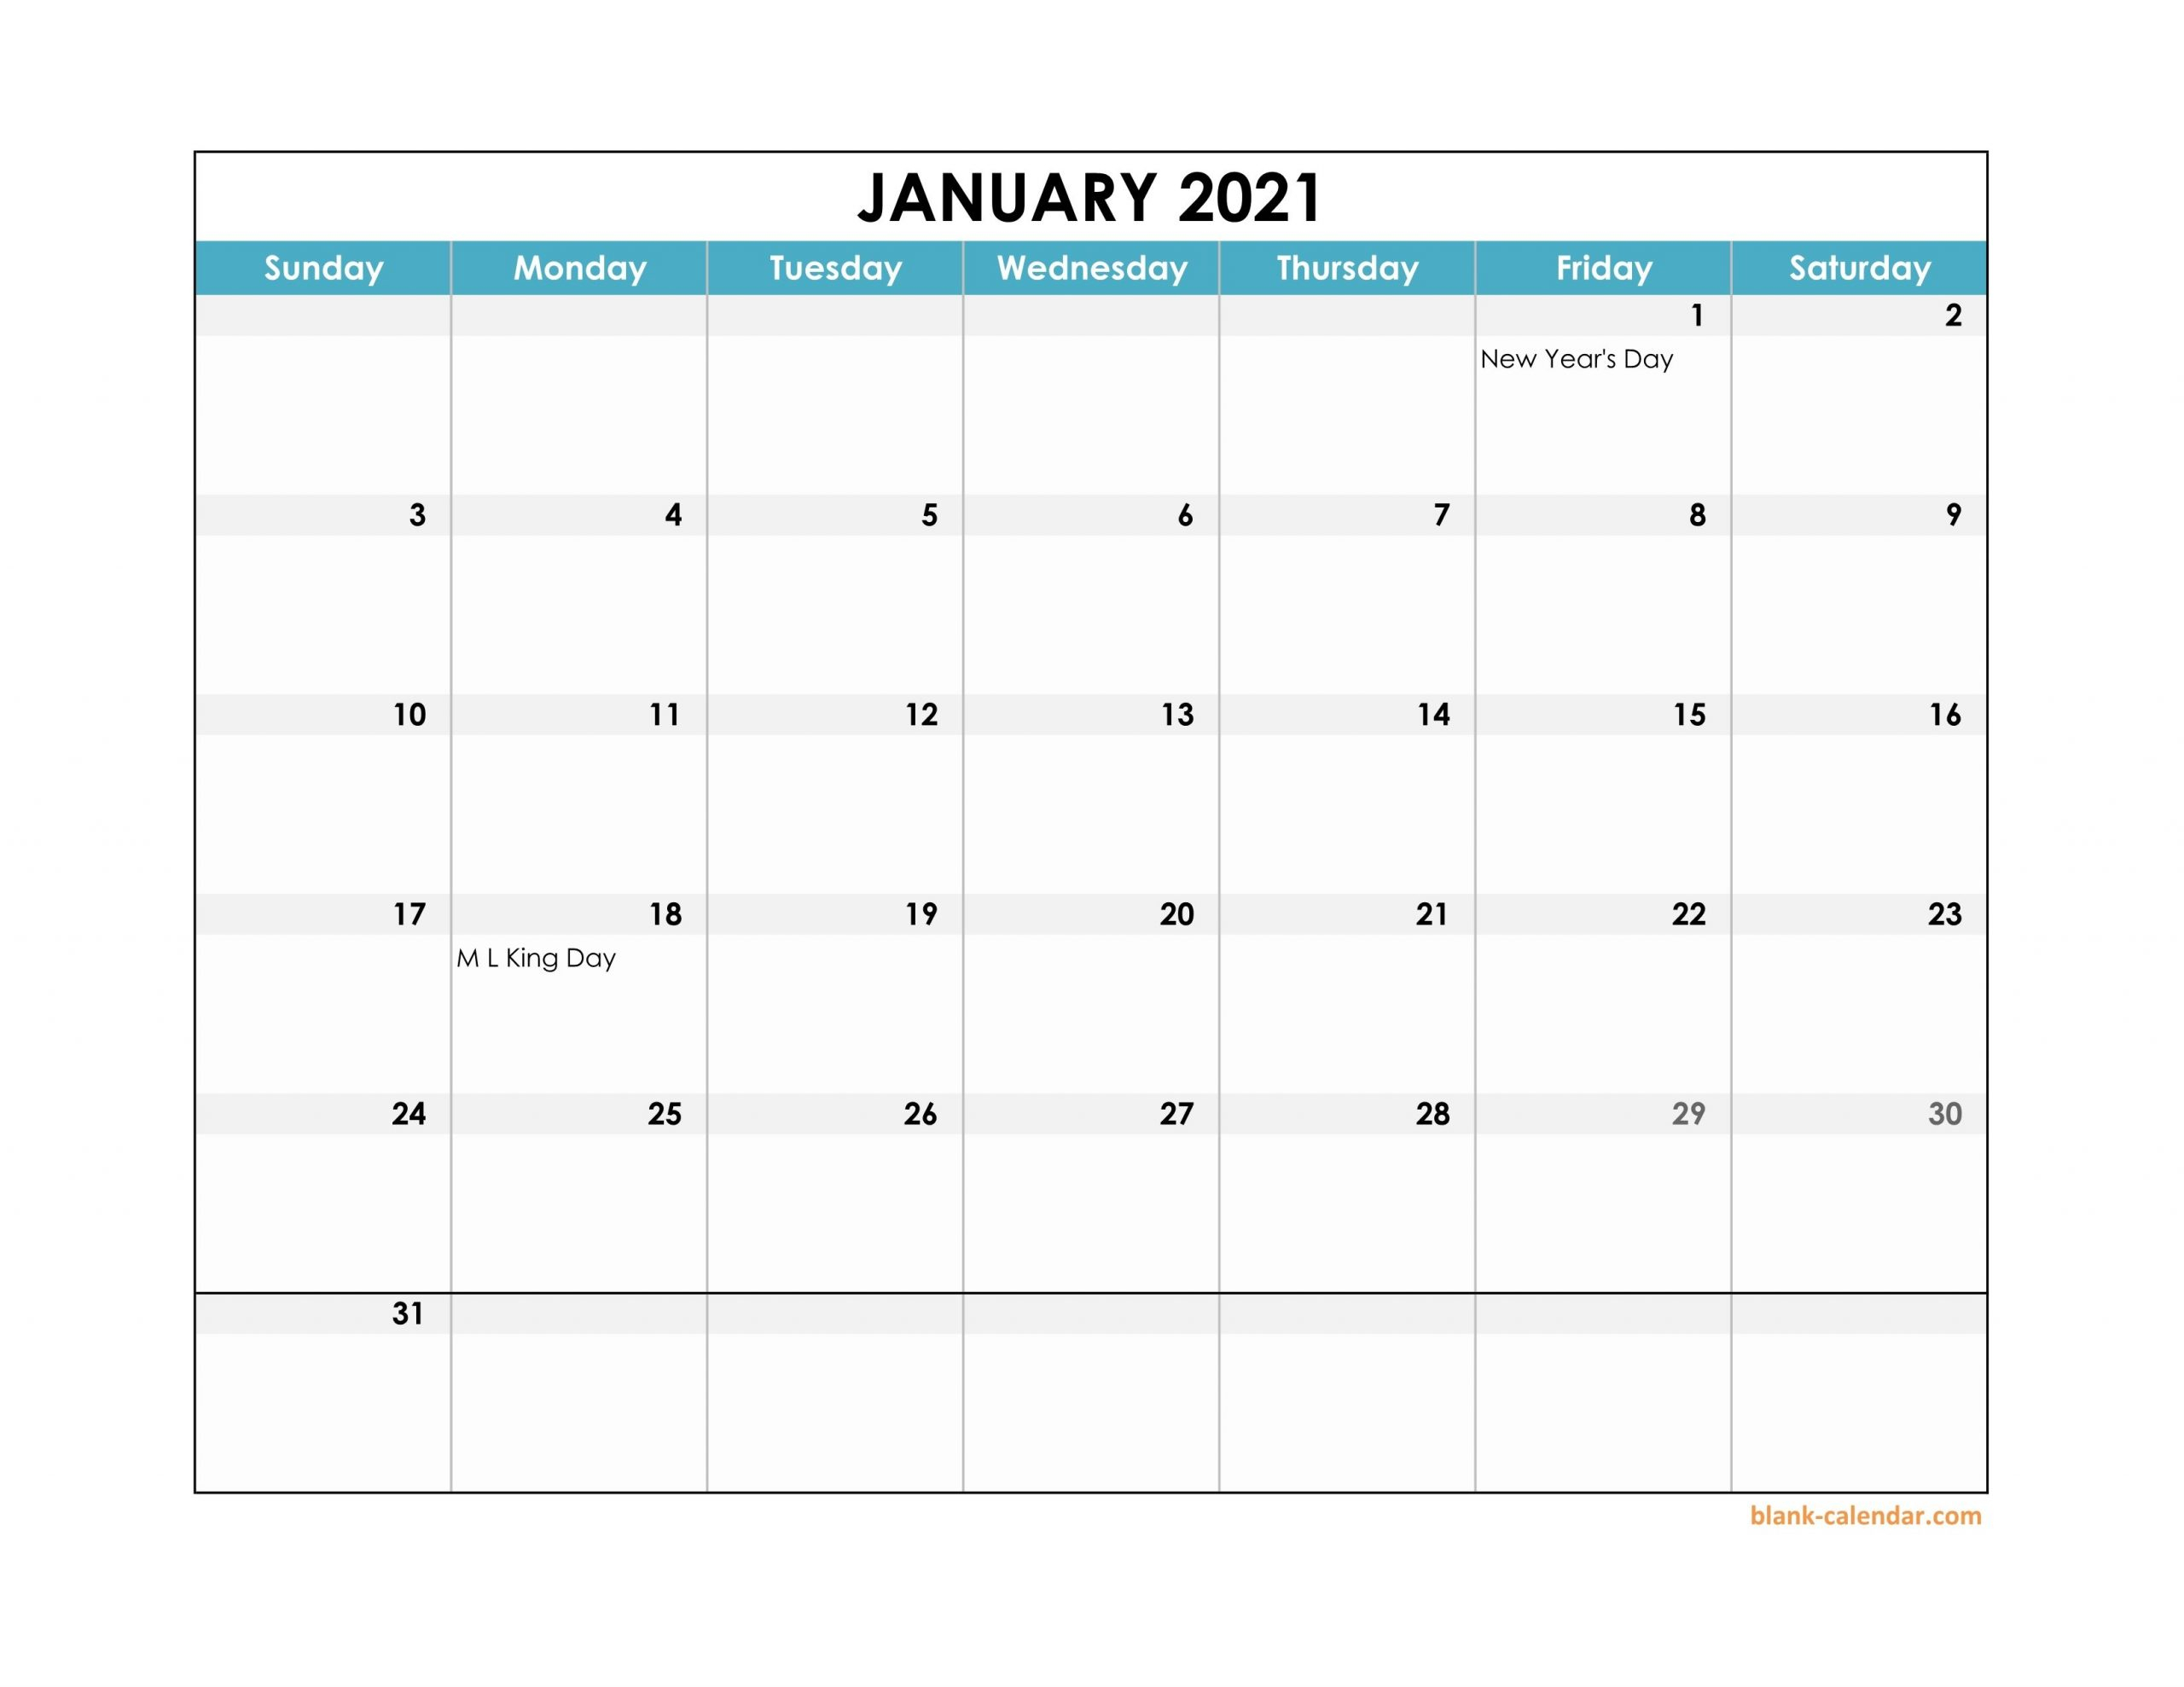 How To Weekly Calendar With Hours Excel 2021 | Get Your Calendar Printable